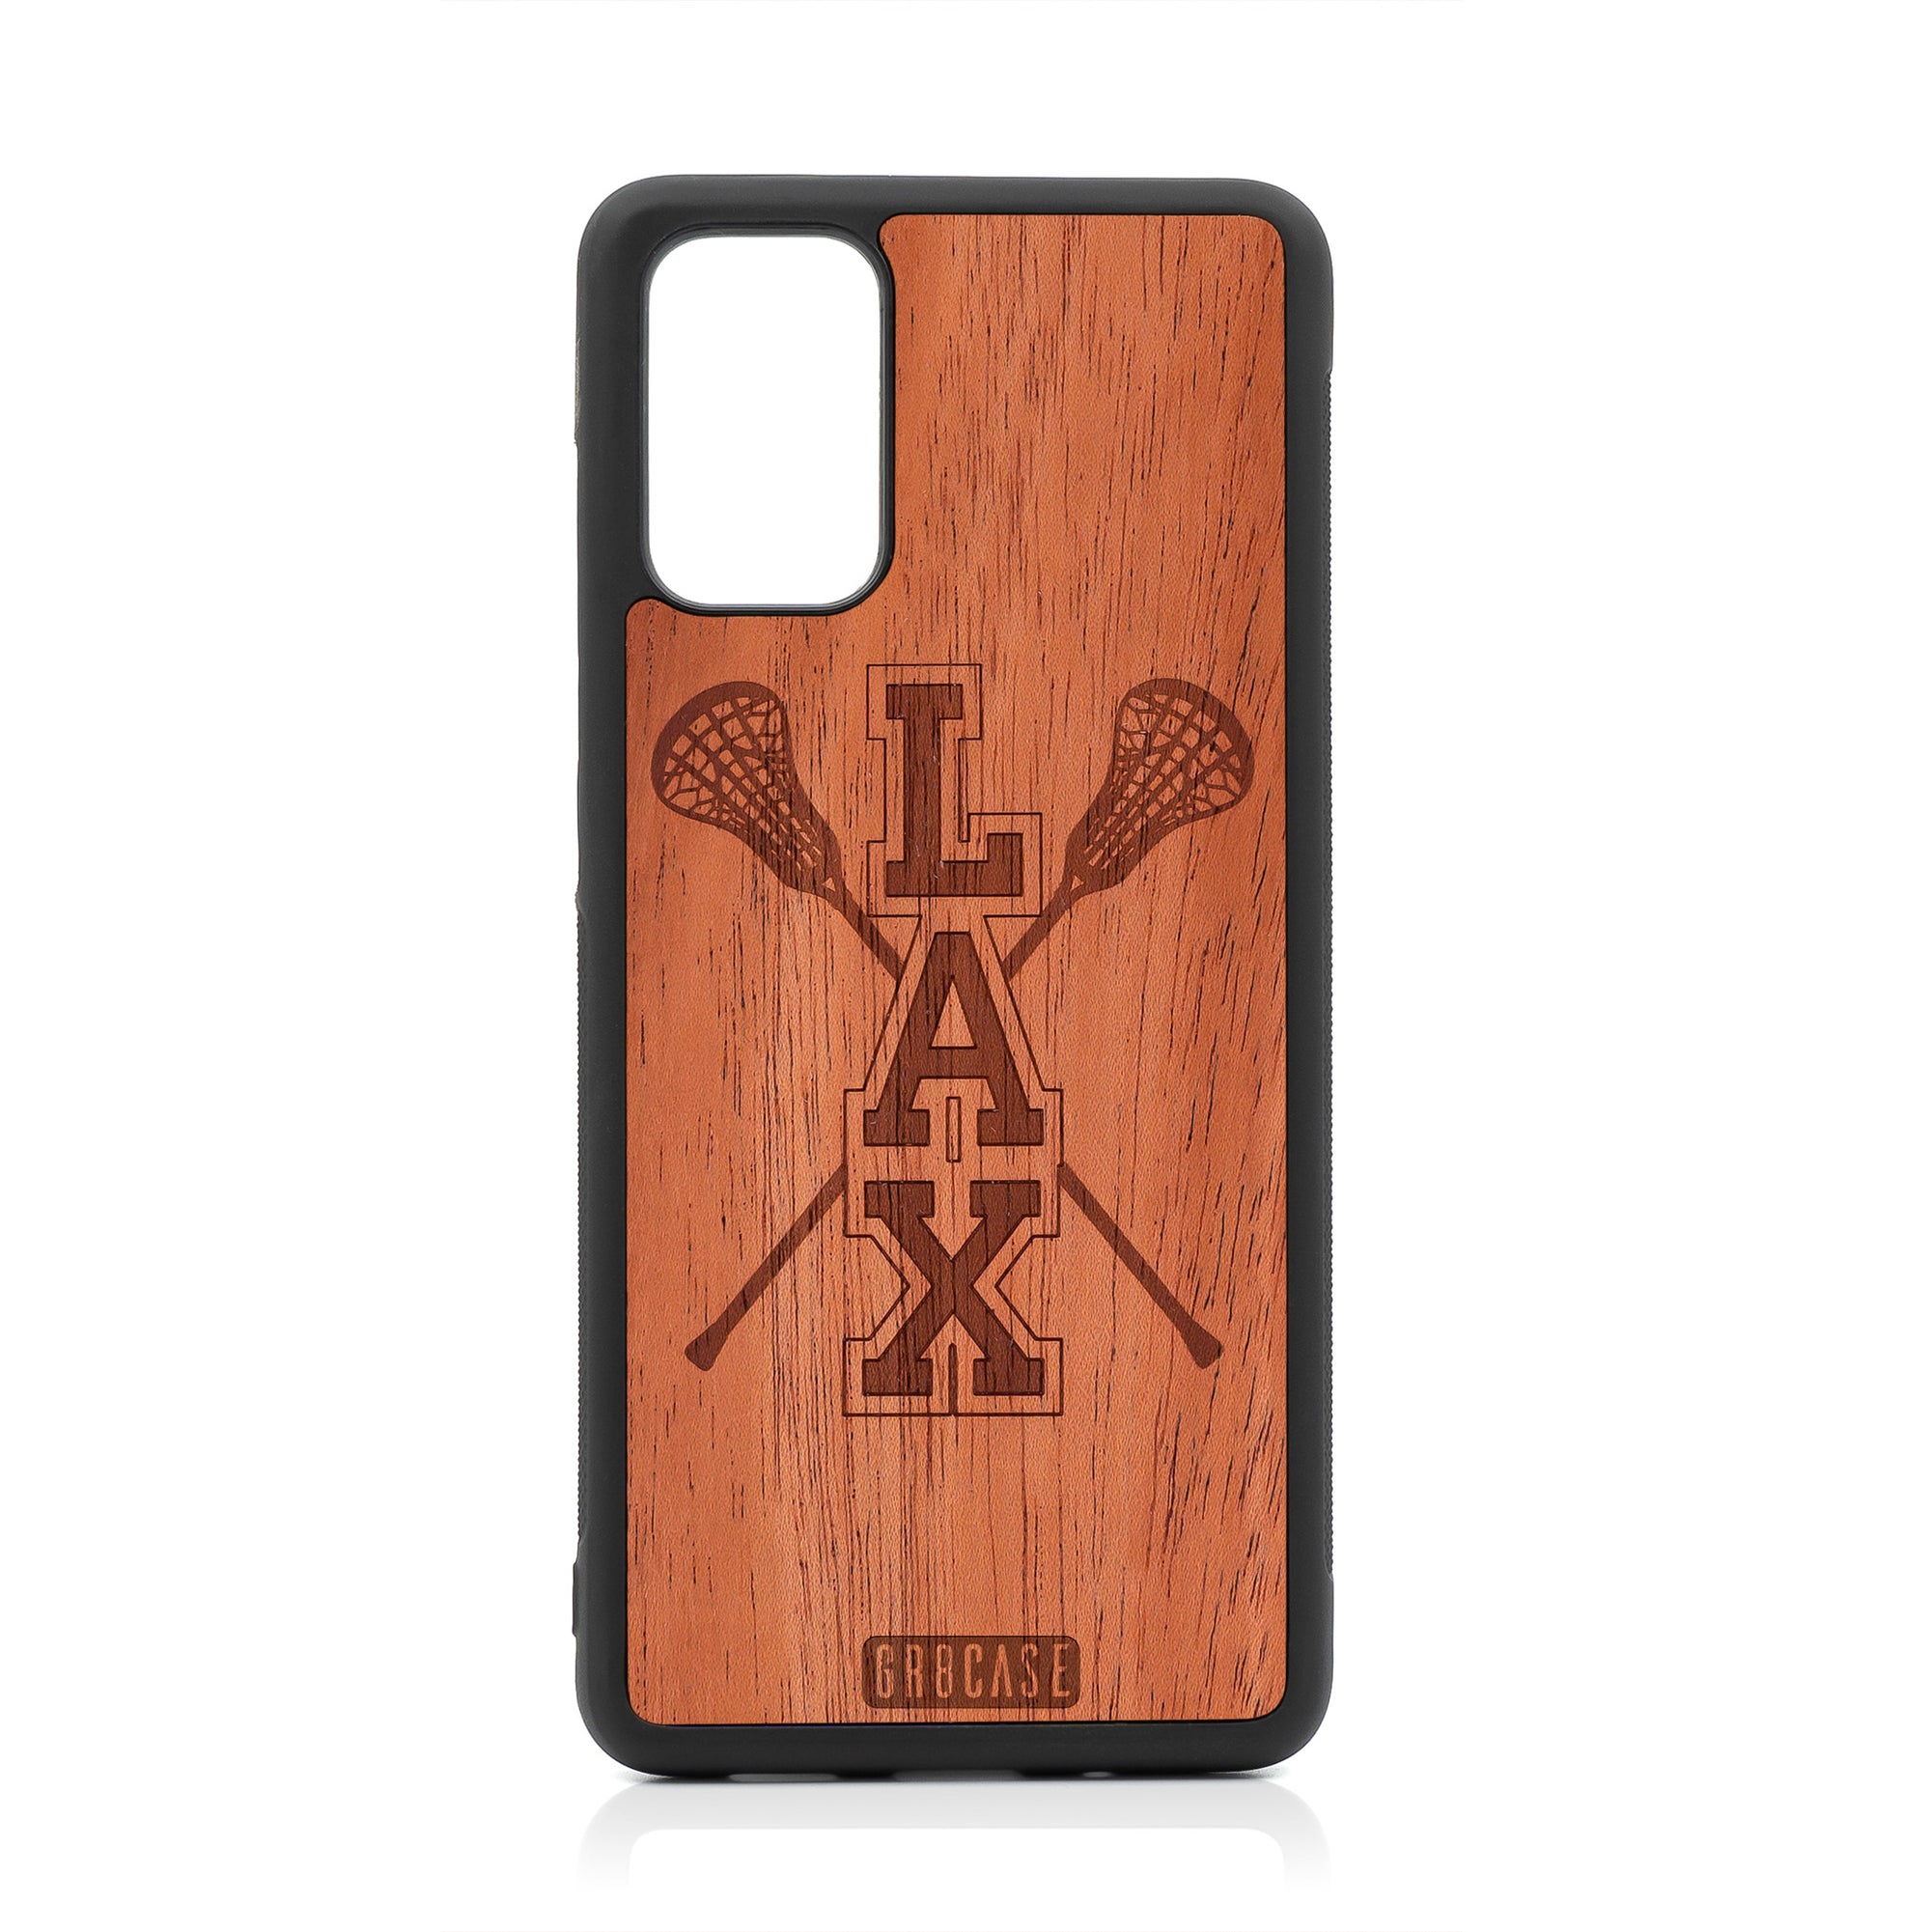 Lacrosse (LAX) Sticks Design Wood Case For Samsung Galaxy S20 Plus by GR8CASE